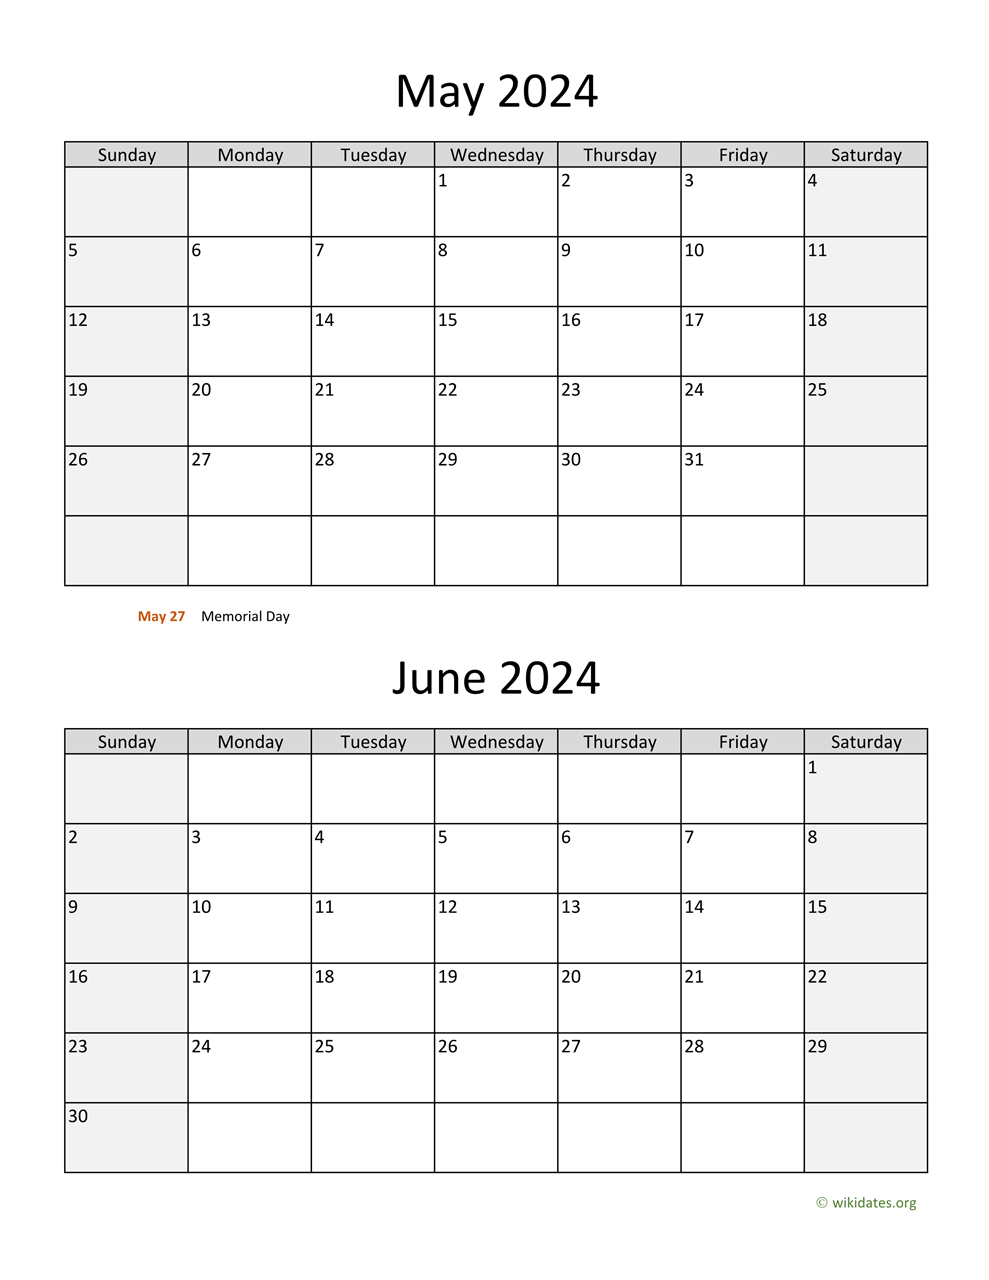 May And June 2024 Calendar | Wikidates for Printable May And June 2024 Calendar